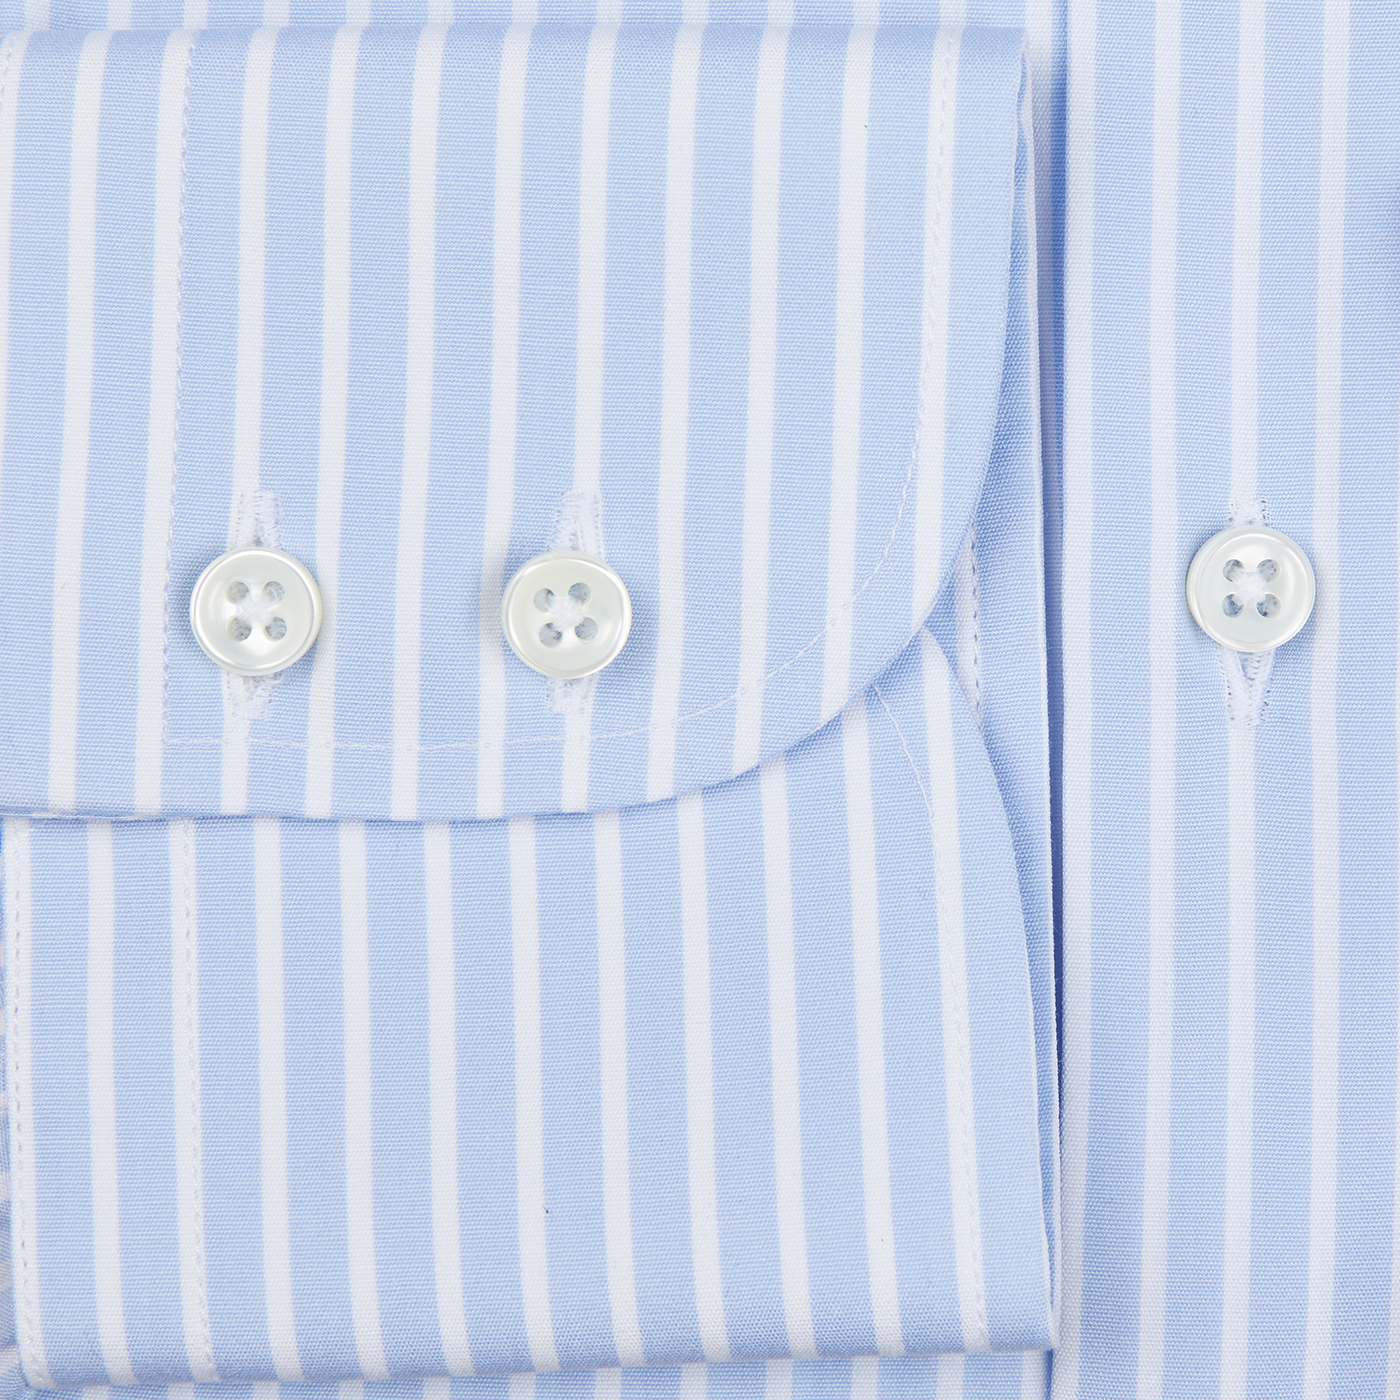 A close up of a Blue White Striped Egyptian cotton shirt with mother-of-pearl buttons by Alexander Kraft Monte Carlo.